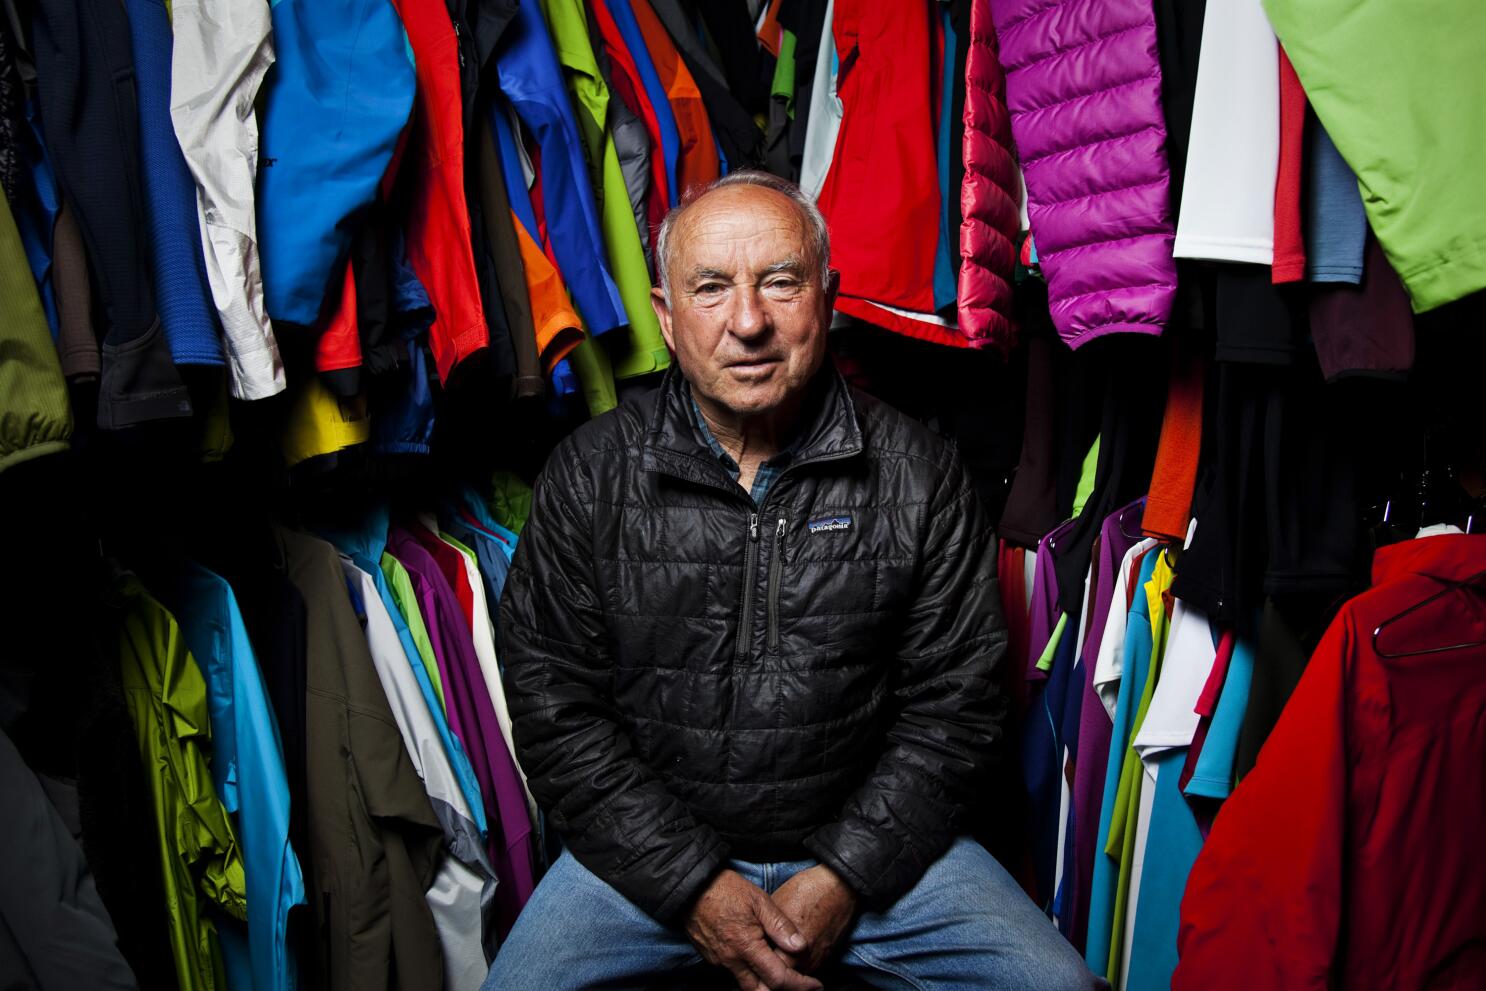 Patagonia founder Yvon Chouinard's history of activism - Los Angeles Times